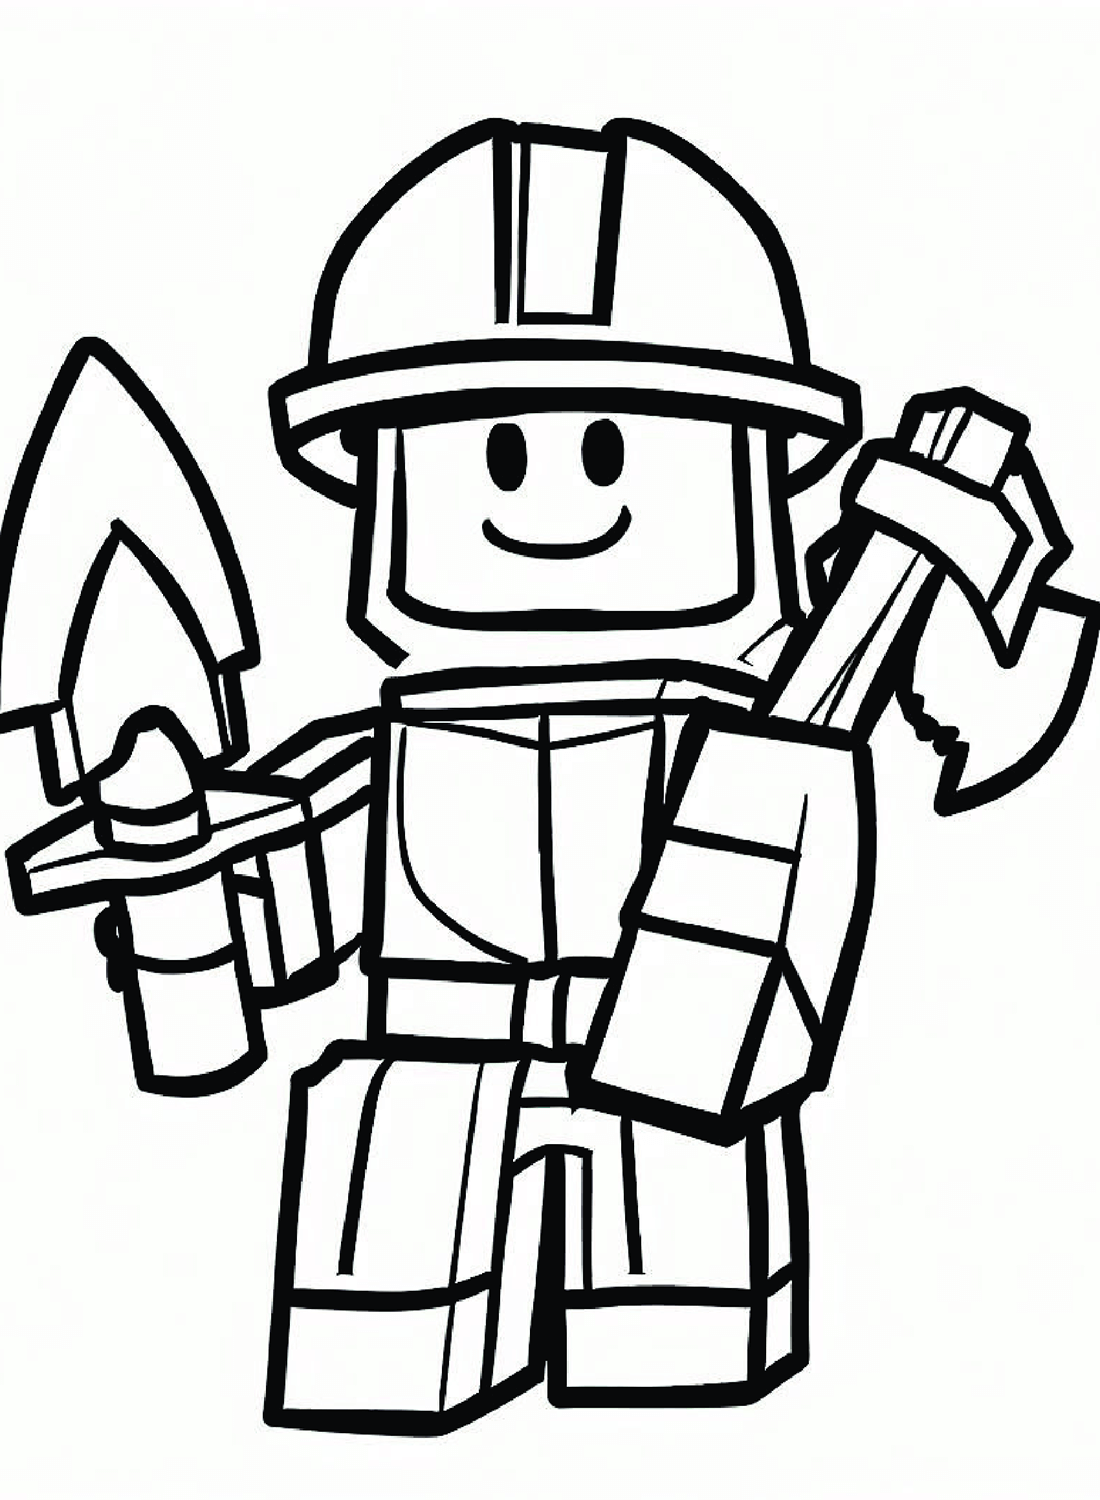 Roblox Coloring Page Free from Roblox